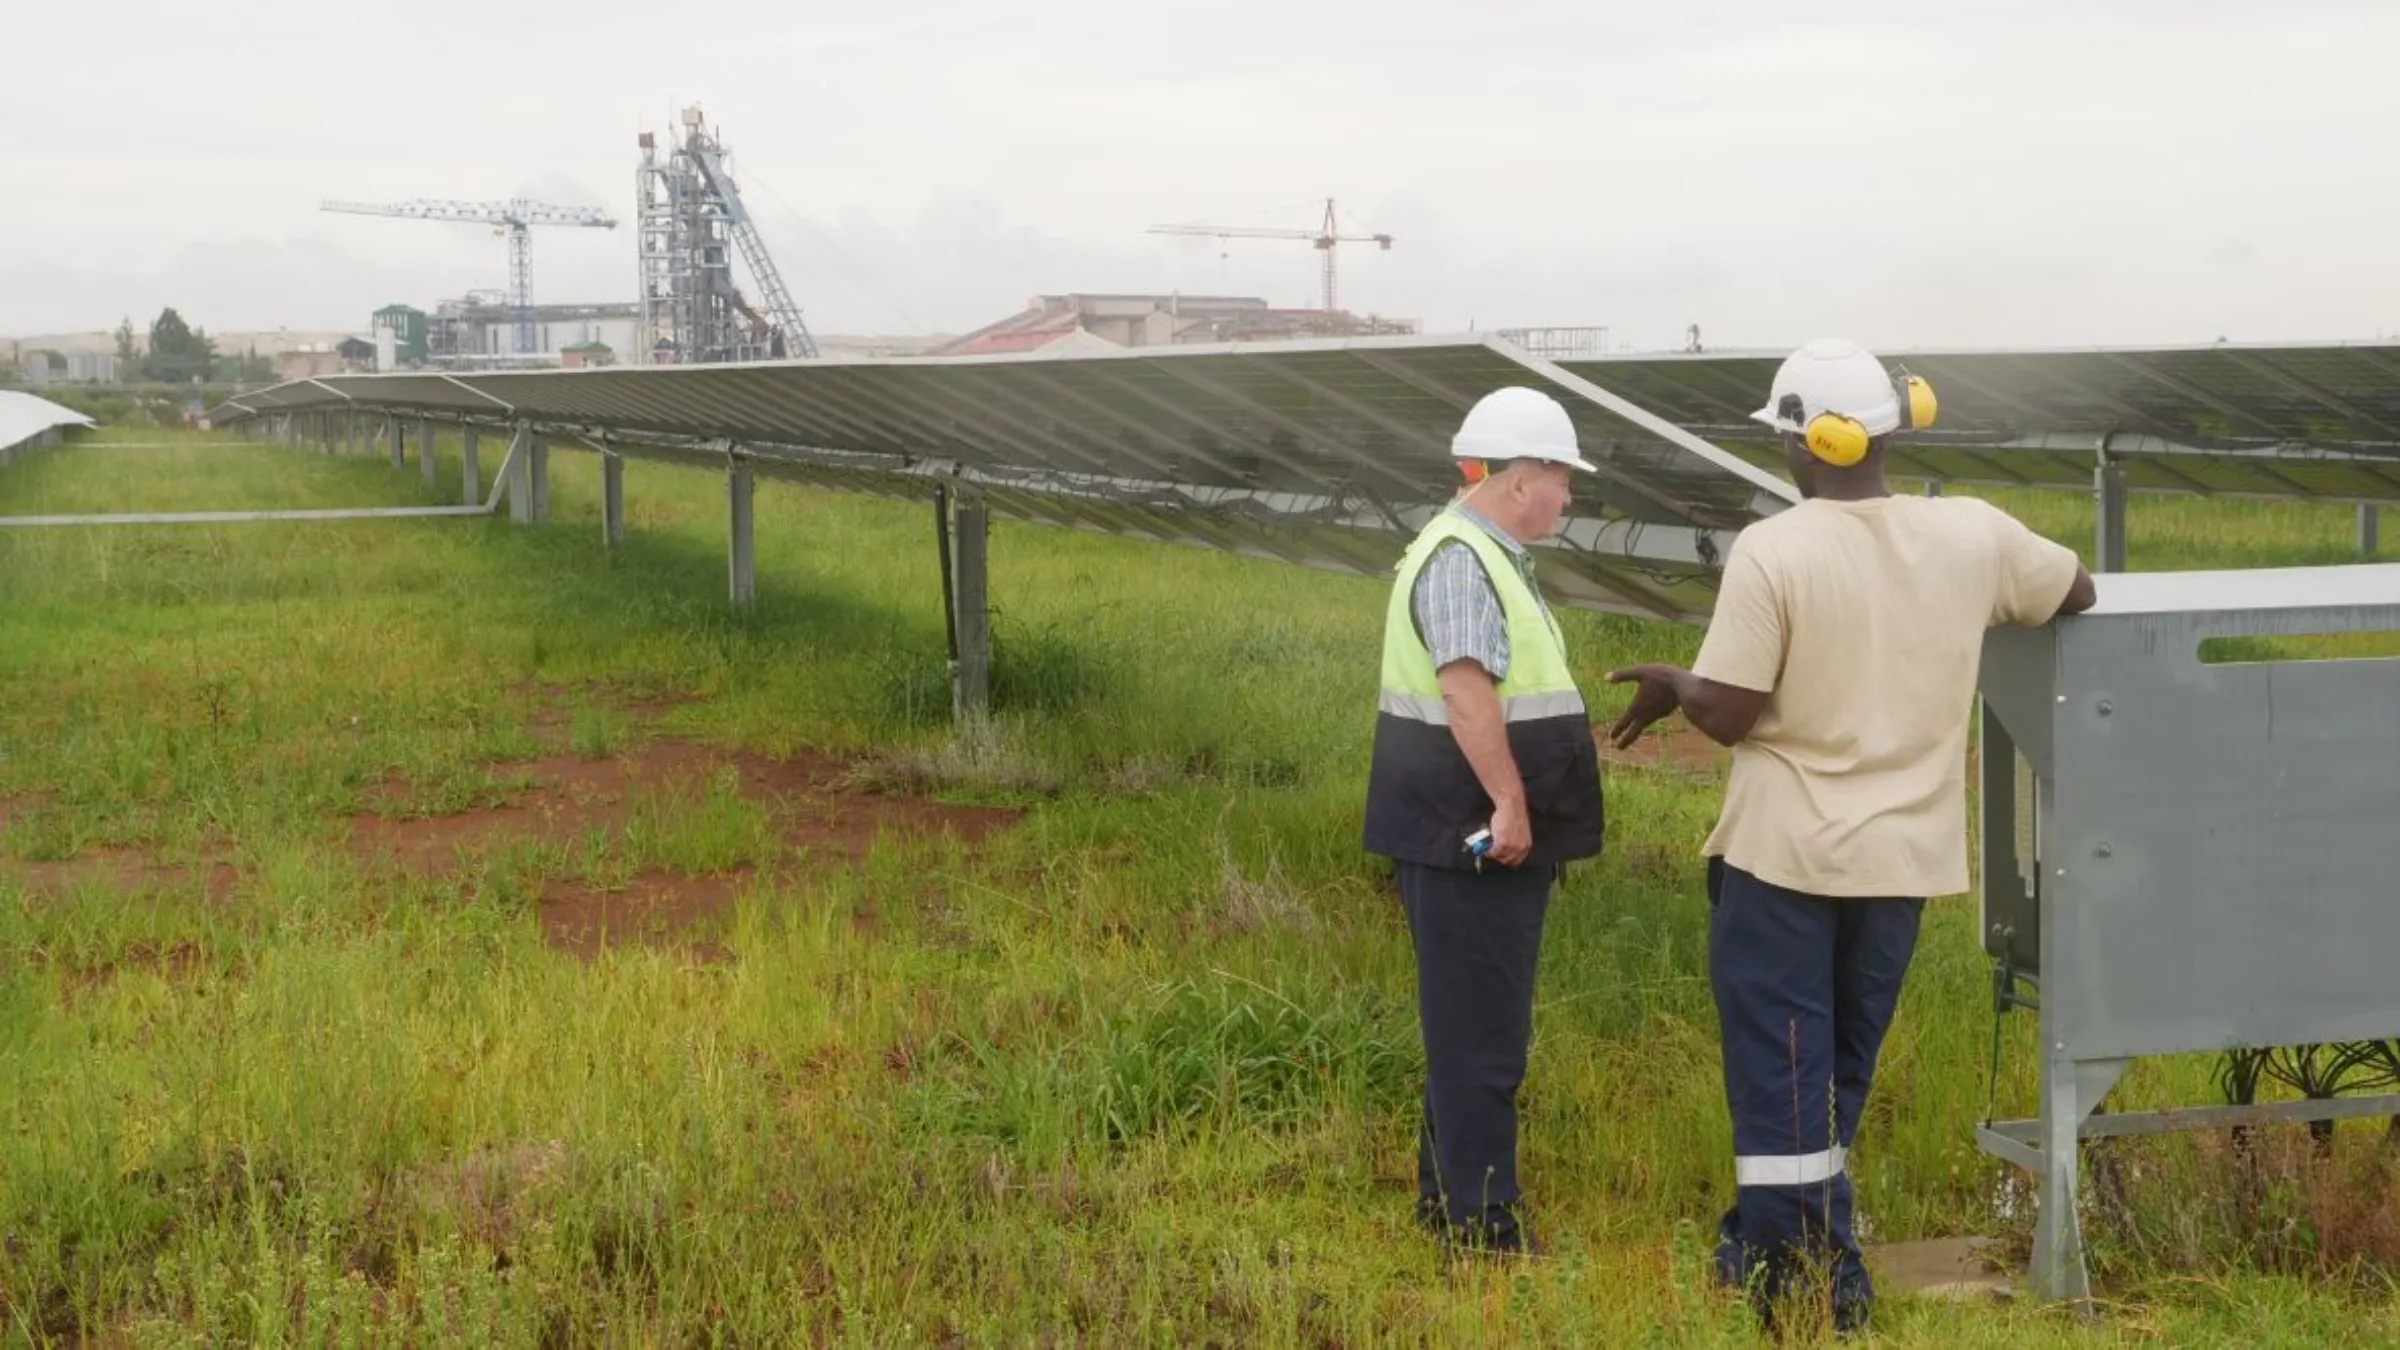 Two employees of the Pan African Resource’s gold mine talk in front of a solar farm used to power the gold mine in Mpumalanga, South Africa, February 1, 2023